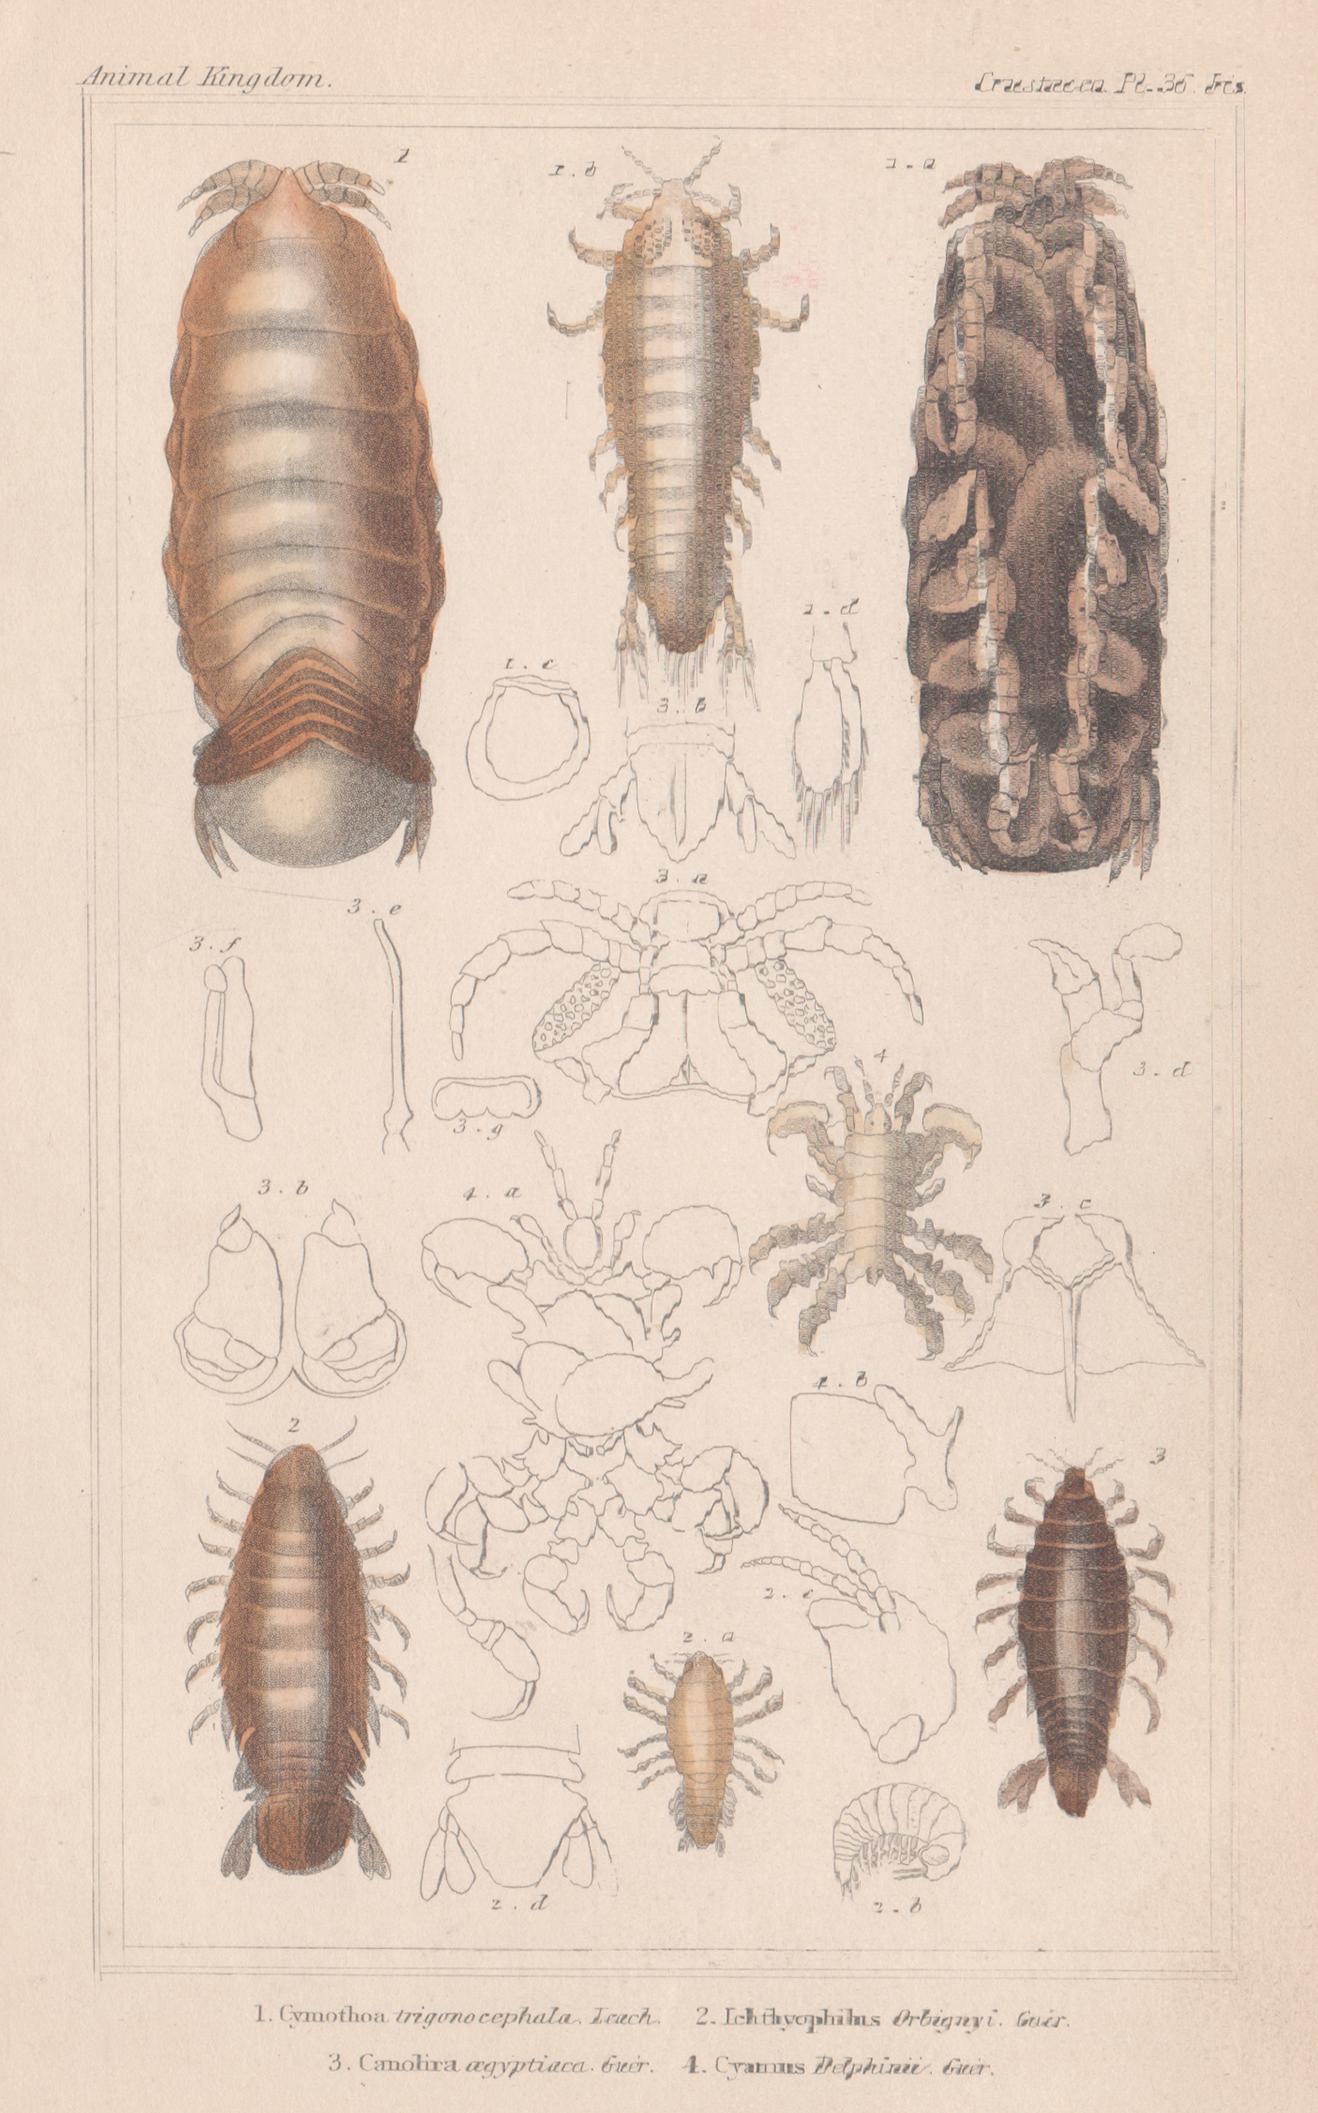 Unknown Animal Print - Crustaceans, antique English natural history engraving print, 1837